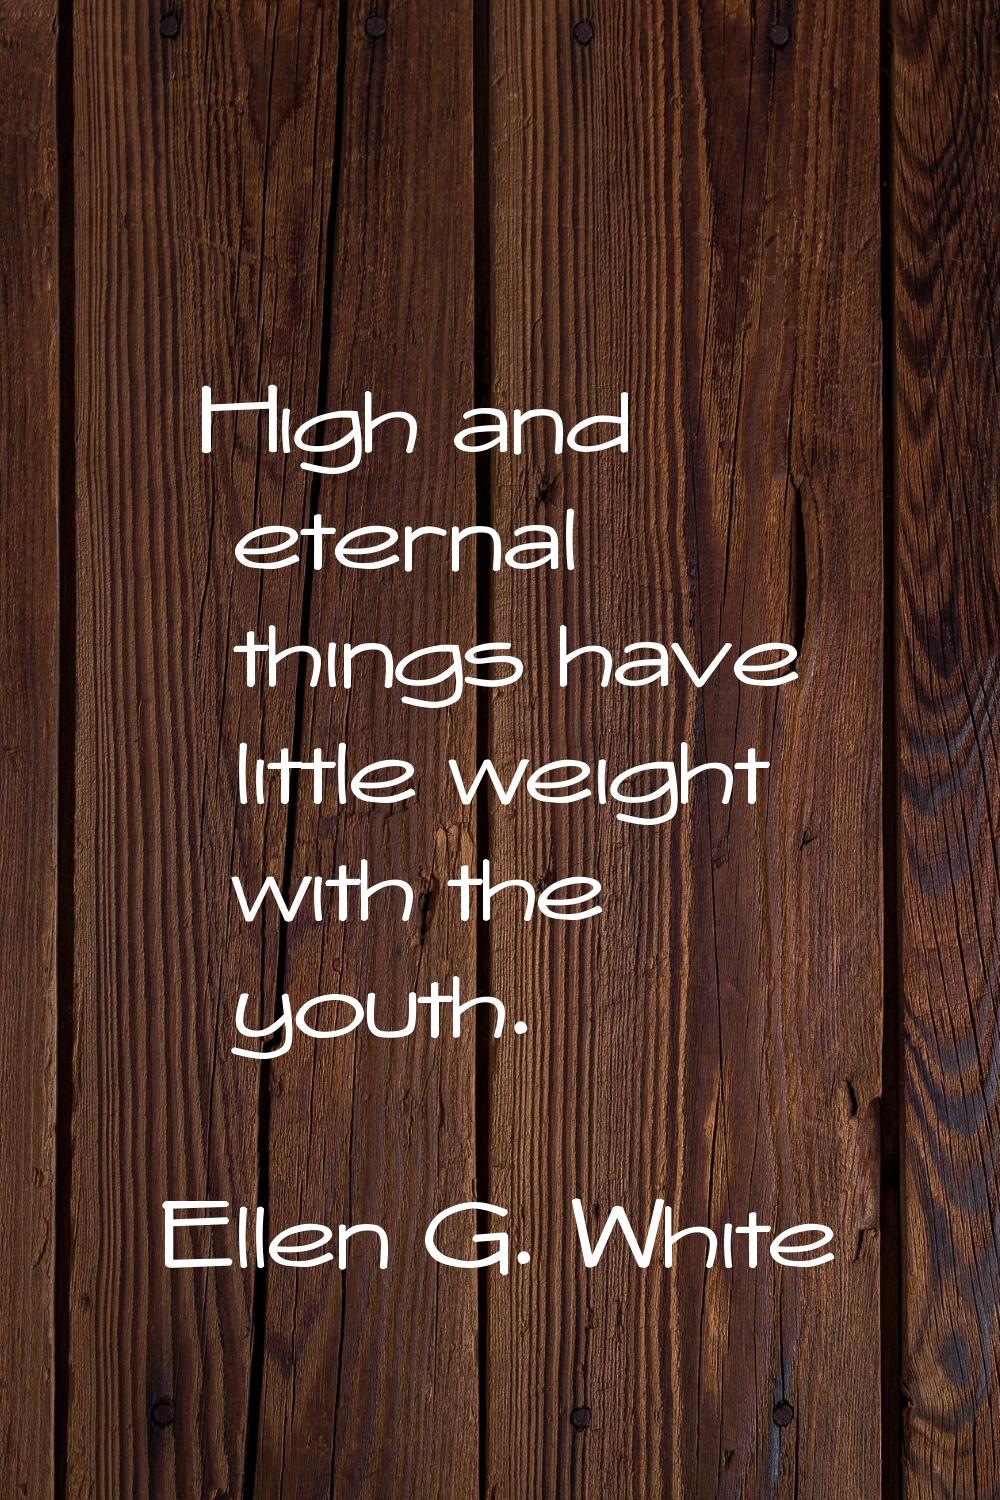 High and eternal things have little weight with the youth.